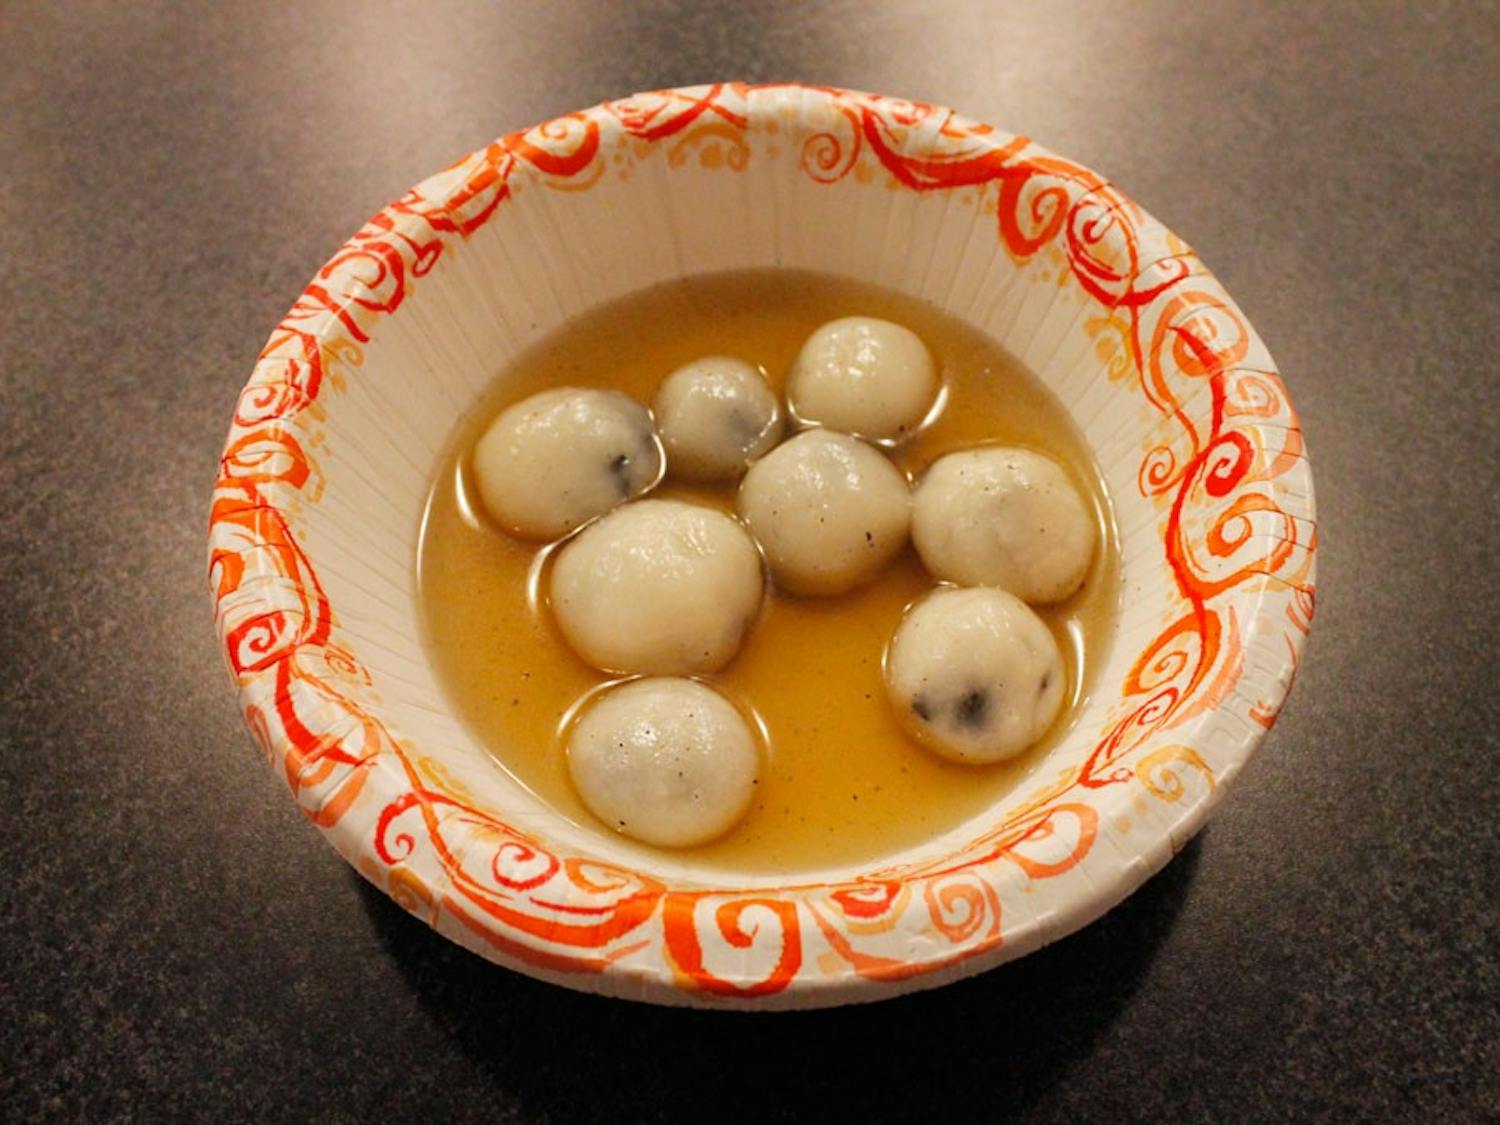 TangYuan is a traditional Chinese New Year cuisine. TangYuan is made of glutinous rice flour and sweet peanuts or sesame seeds. Chinese people traditionally eat TangYuan 15 days after Chinese New Year. 